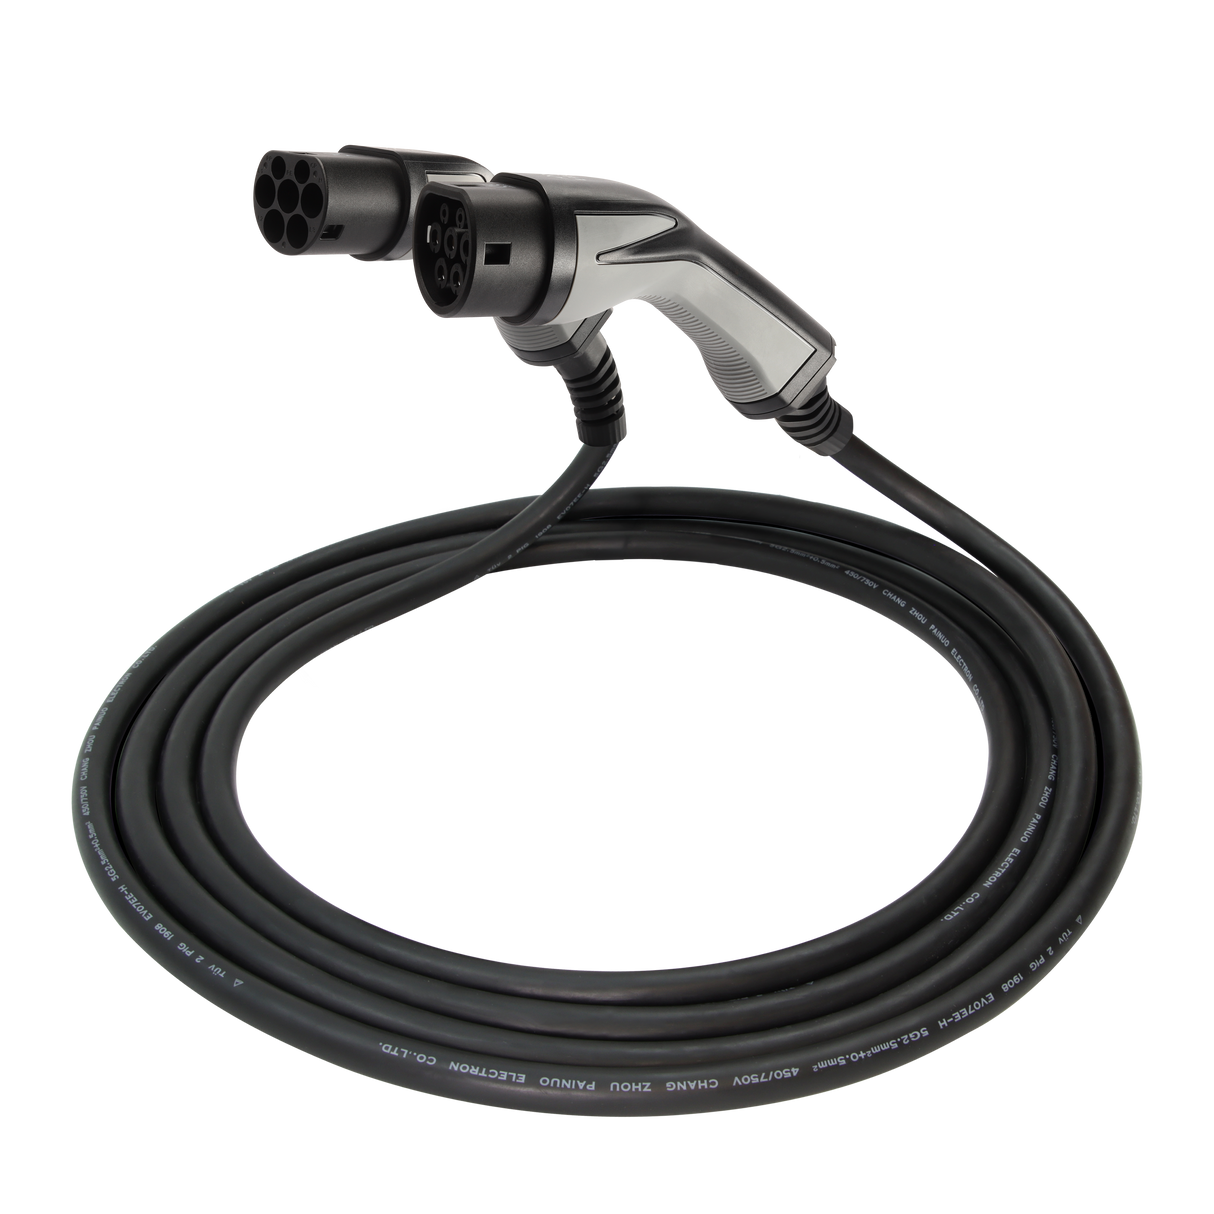 Charging cable Mercedes A -Class - Erock Pro Type 2 - 16A 3 phase (11 kW)